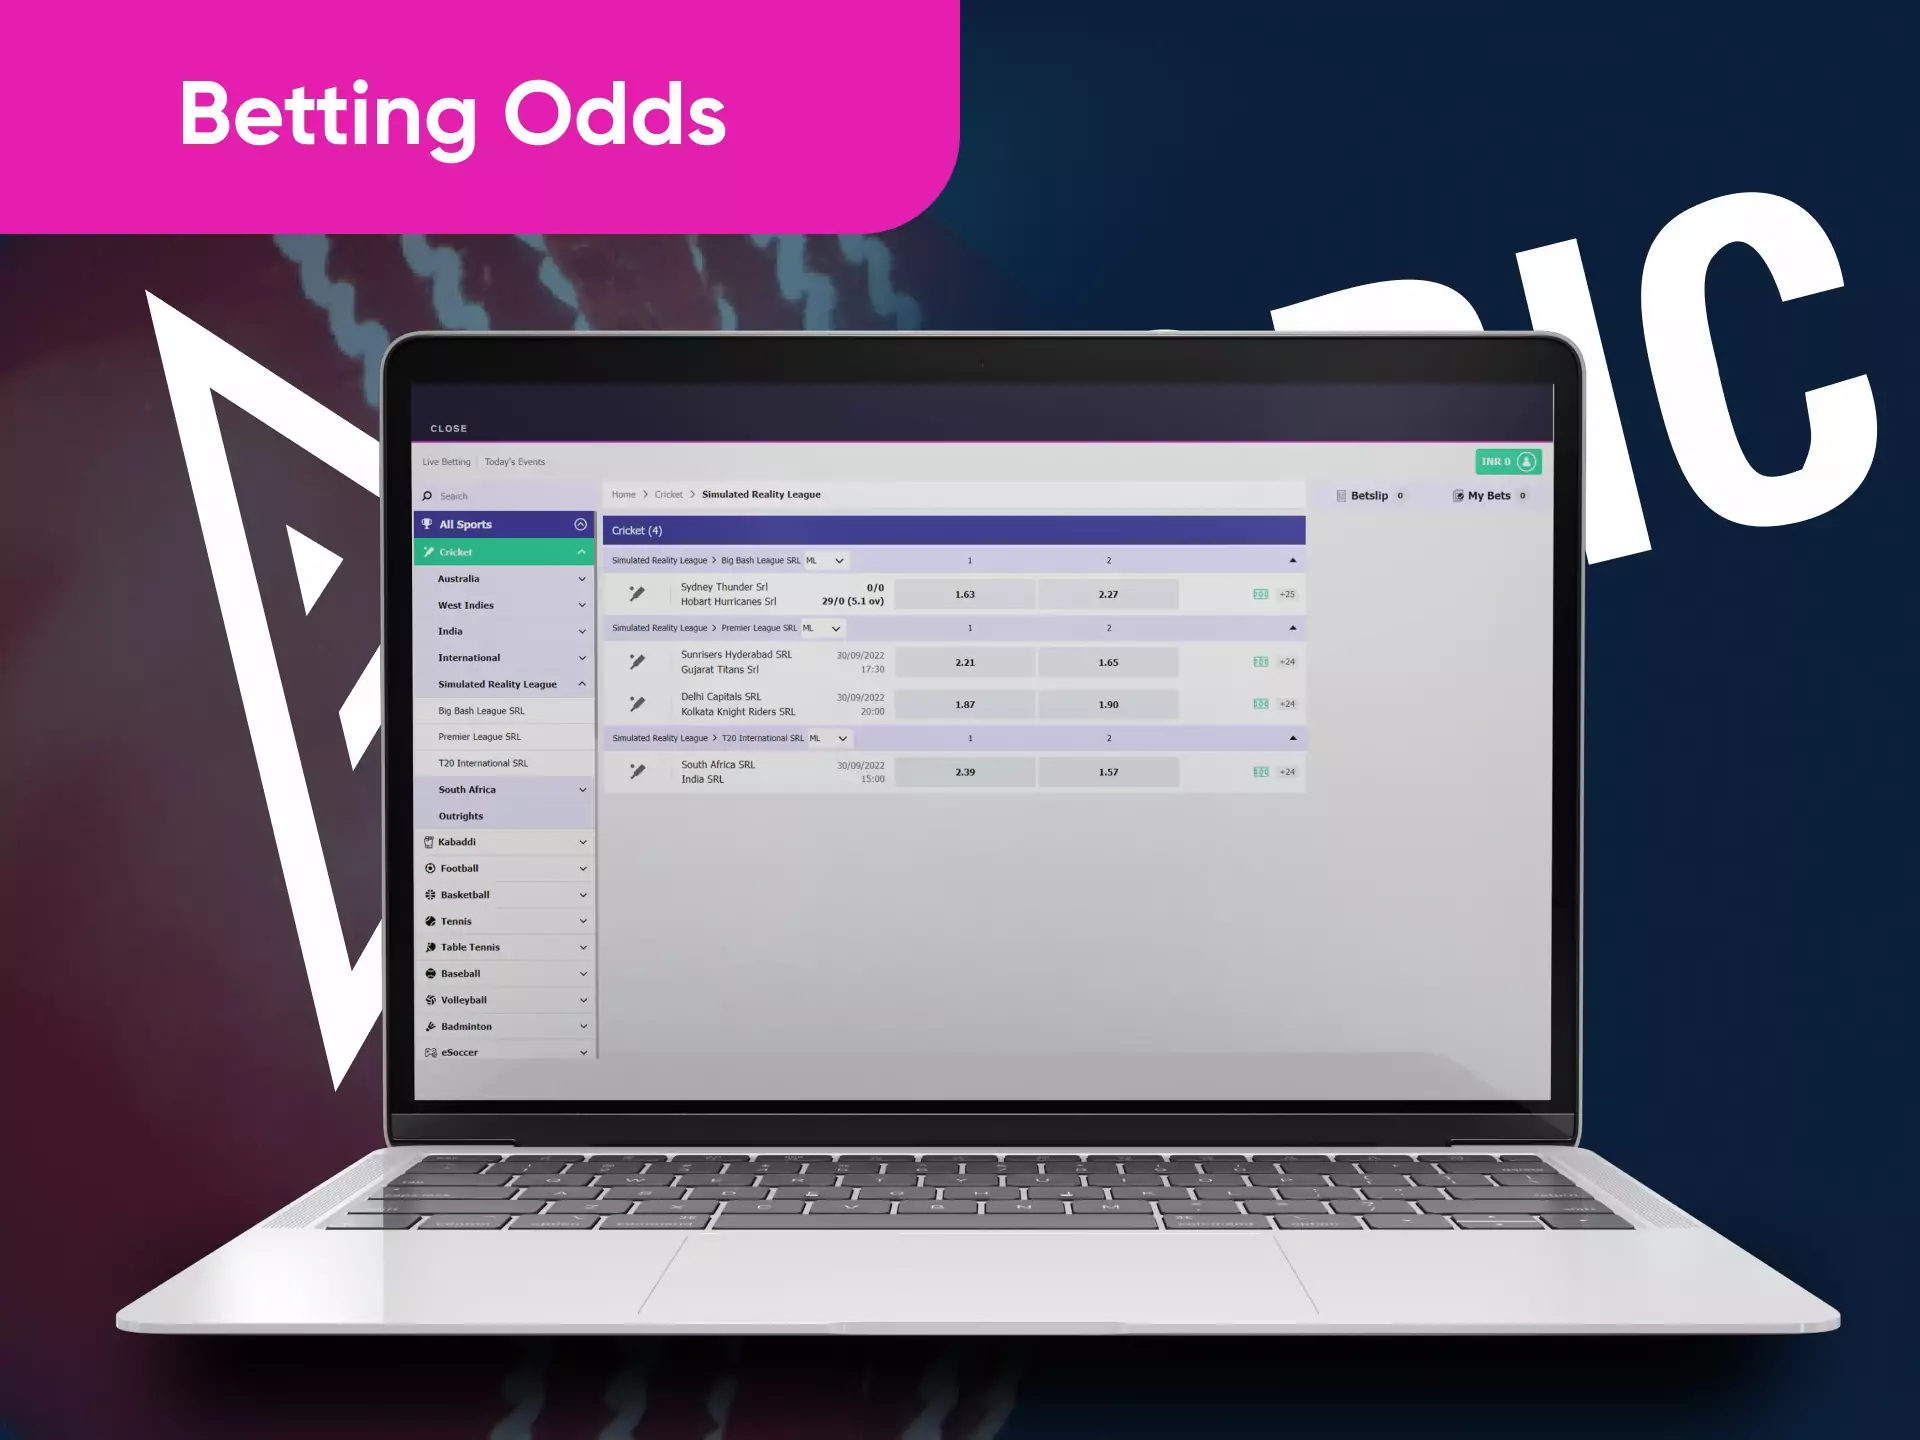 Becric provides great odds to its customers.